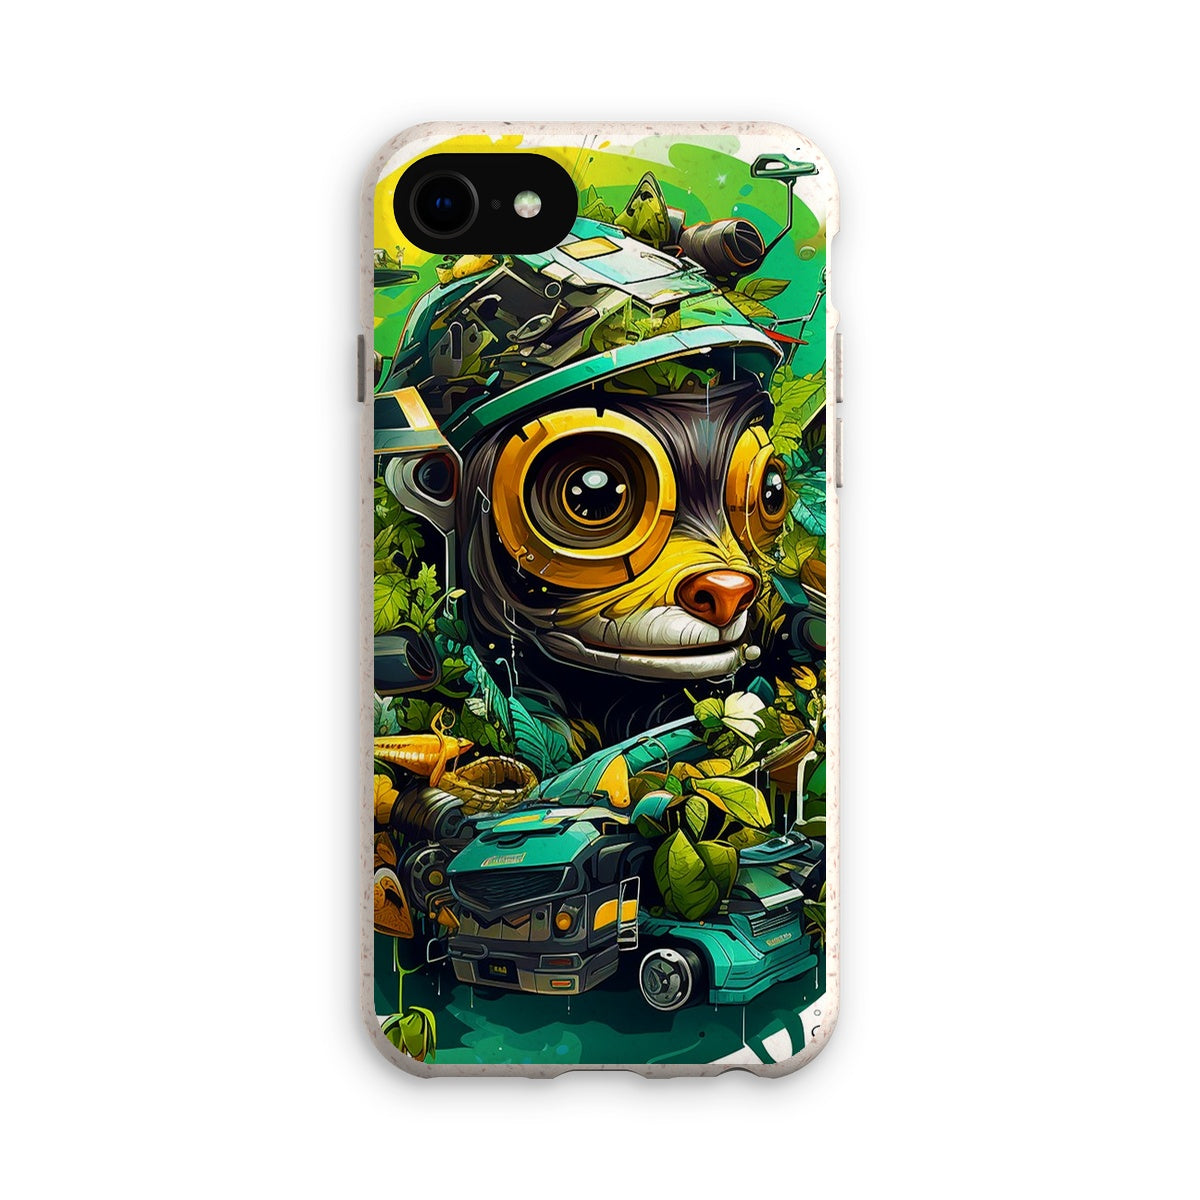 Nature's Resilience: Surreal Auto-Forest Artwork - Whimsical Raccoon and Greenery Infused Car  Eco Phone Case